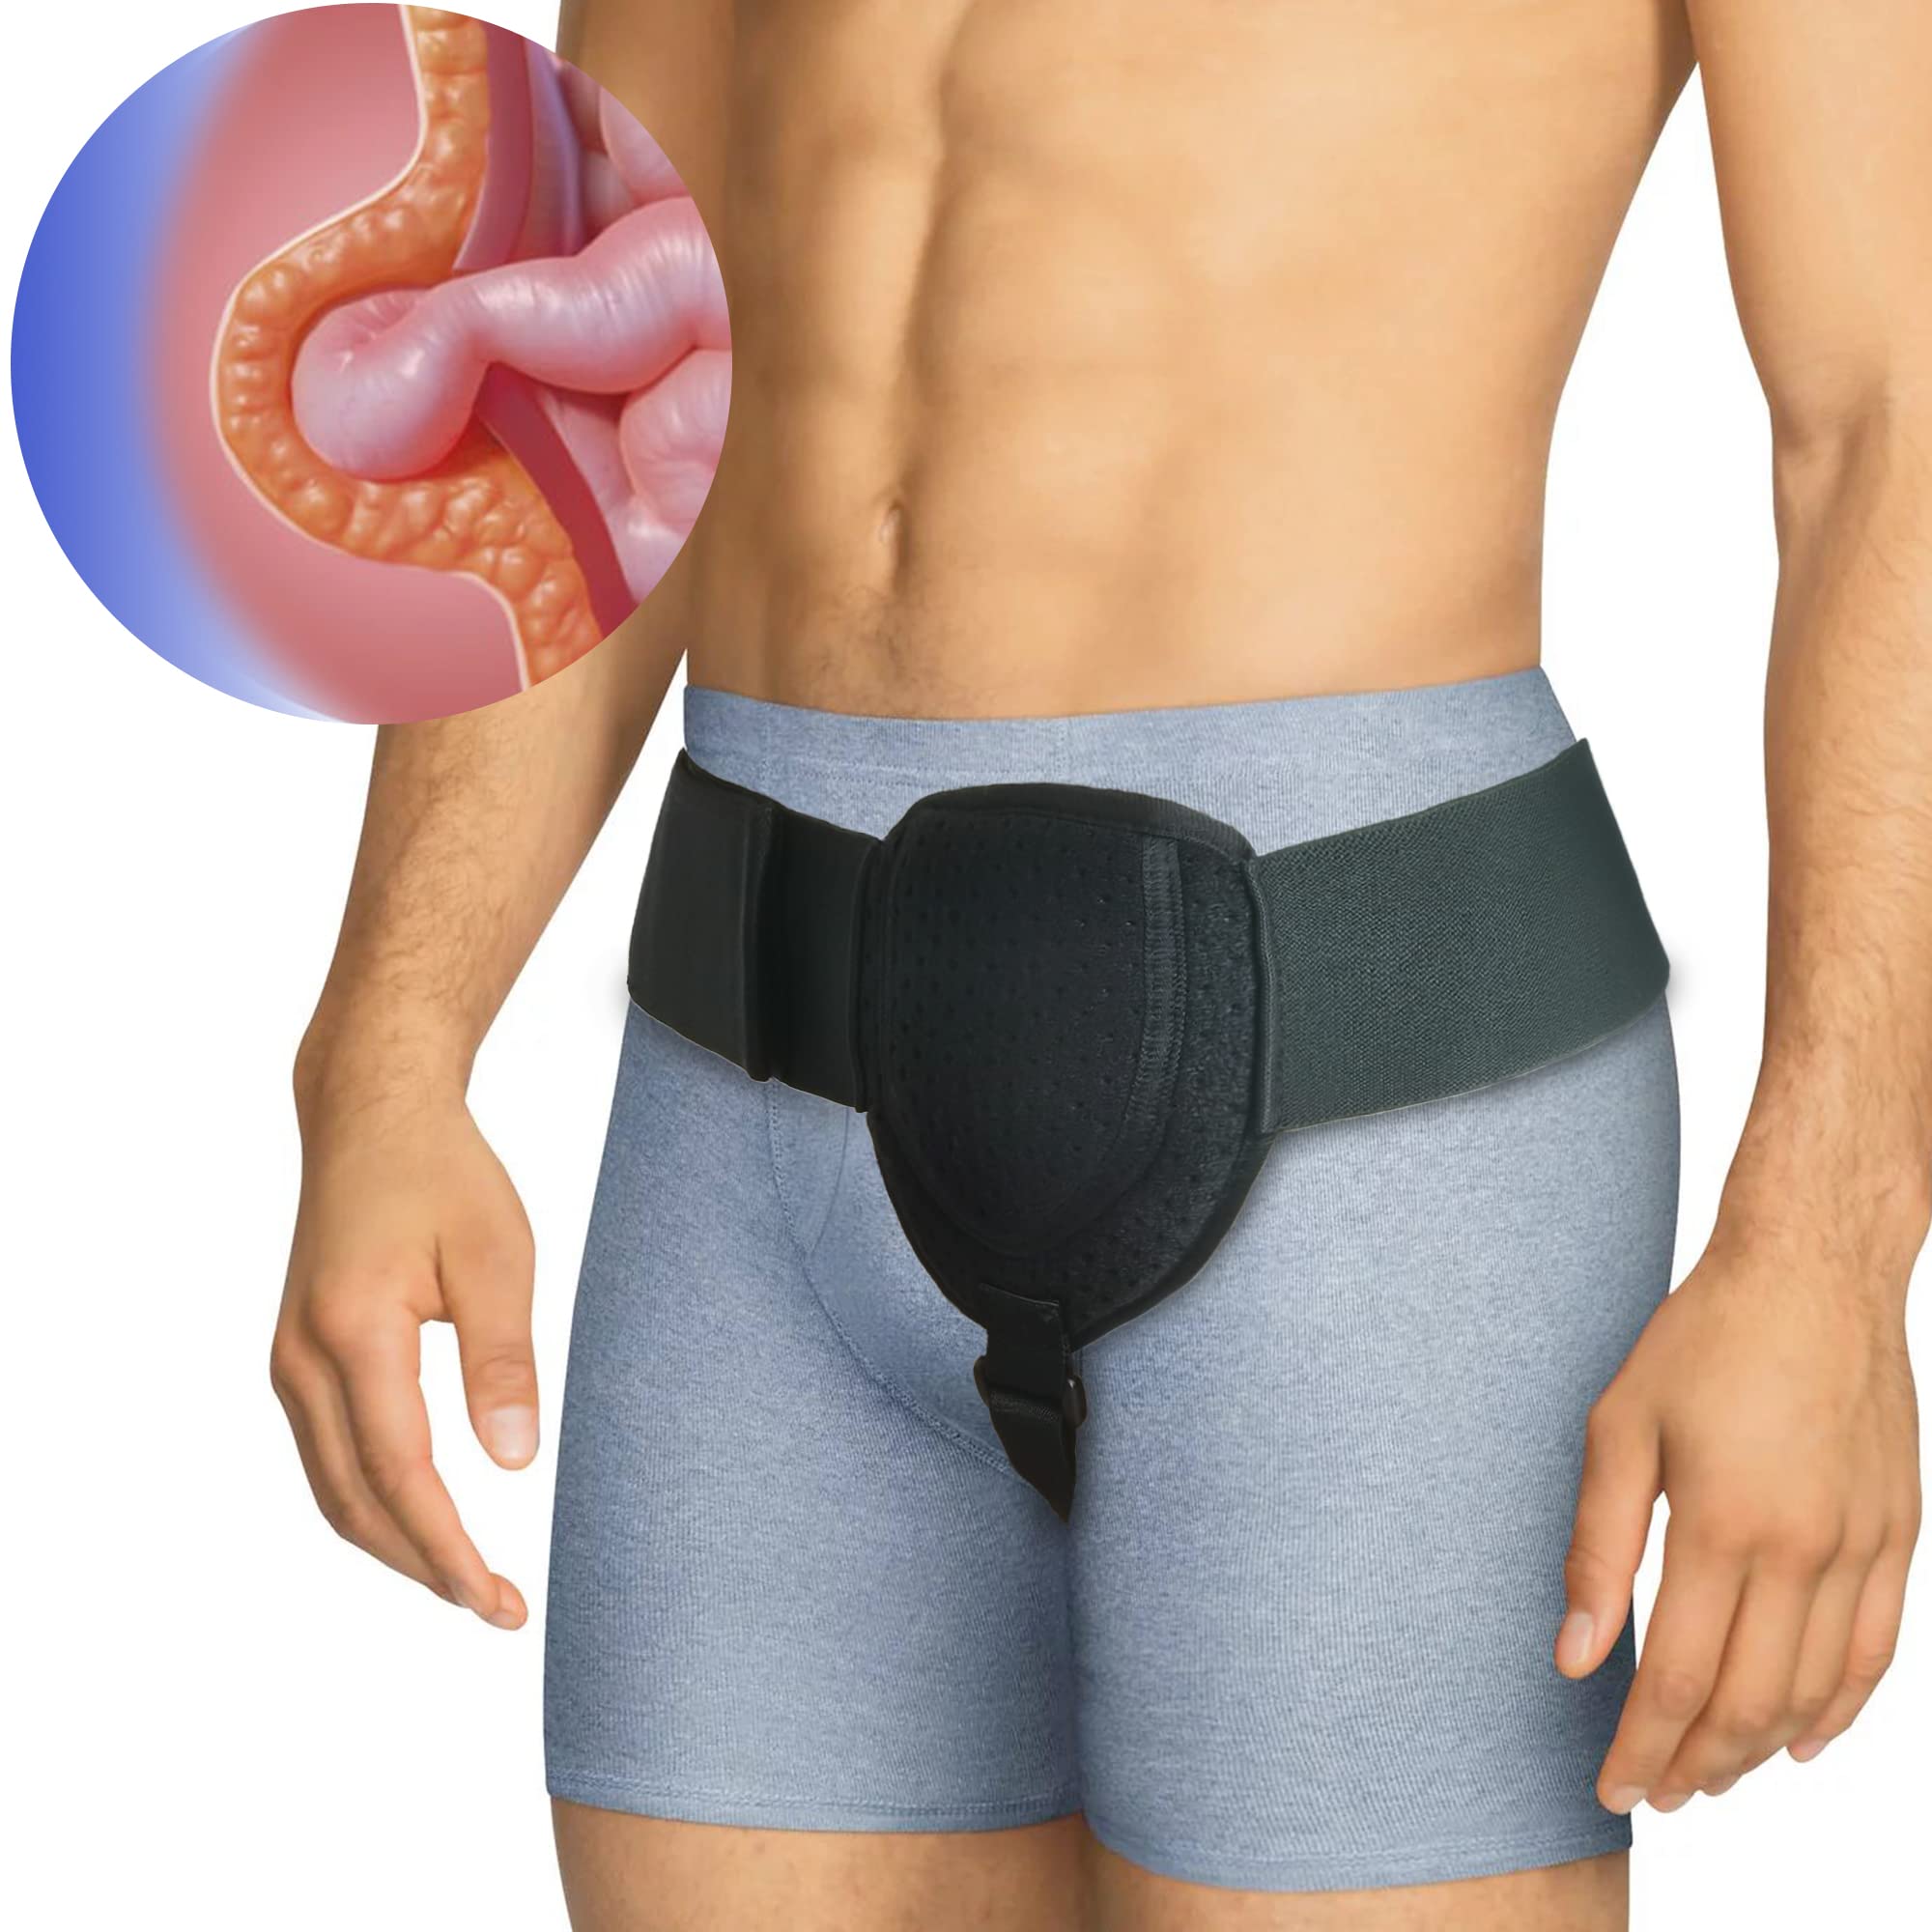 Inguinal Hernia Support for Men and Women - Hernia belt truss for both  sides, groin support, hernia belts for men inguinal - Breathable and  adjustable